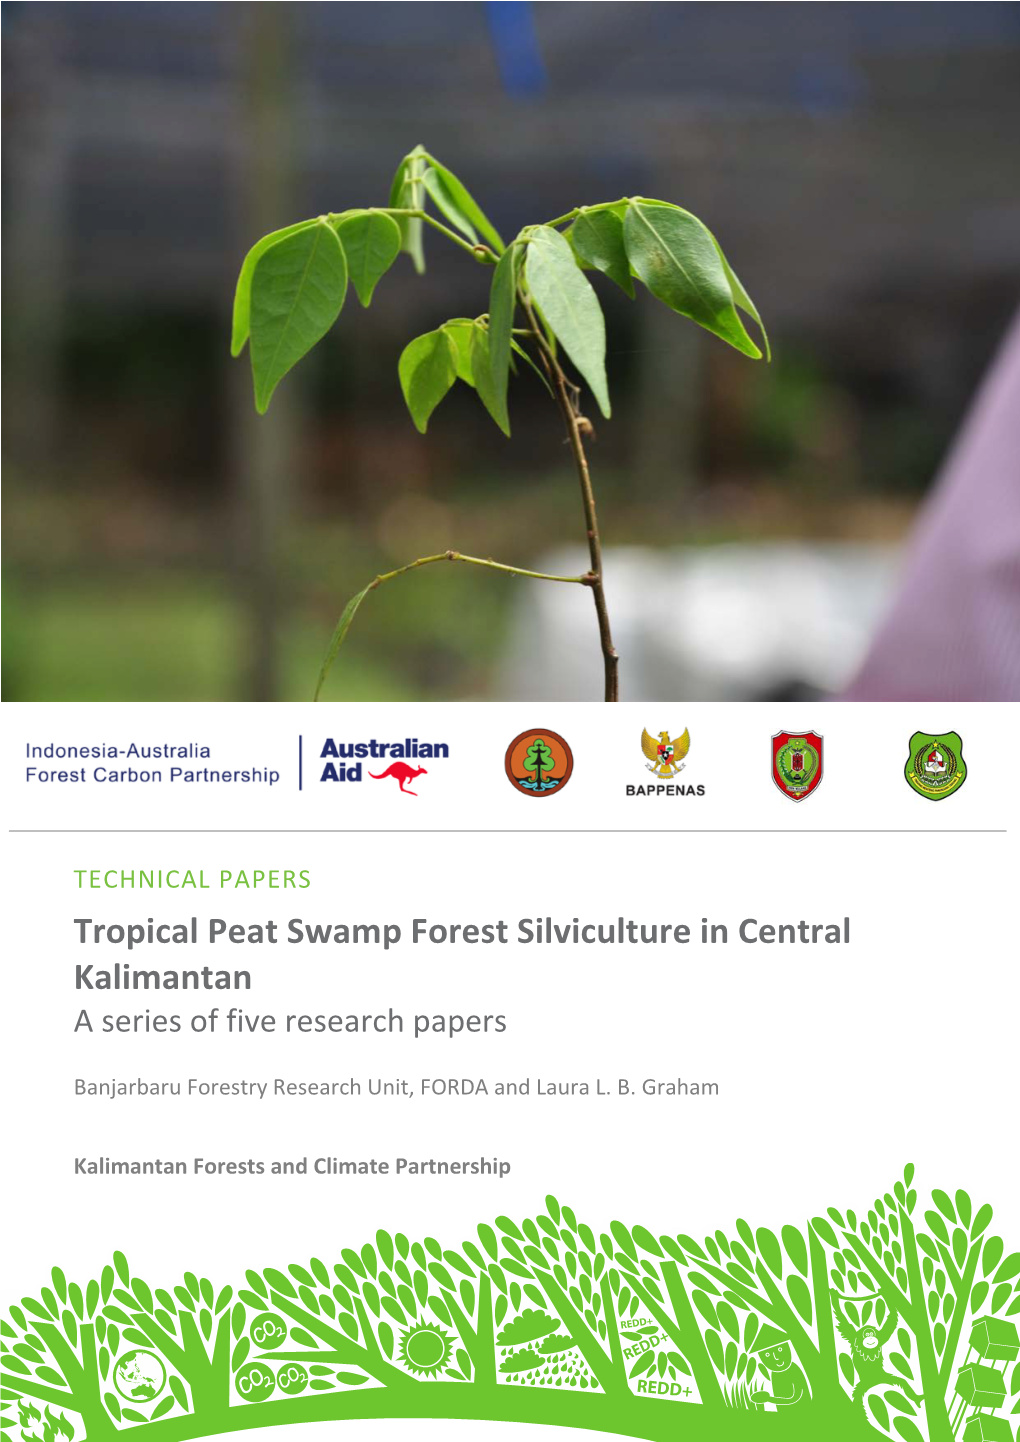 Tropical Peat Swamp Forest Silviculture in Central Kalimantan a Series of Five Research Papers